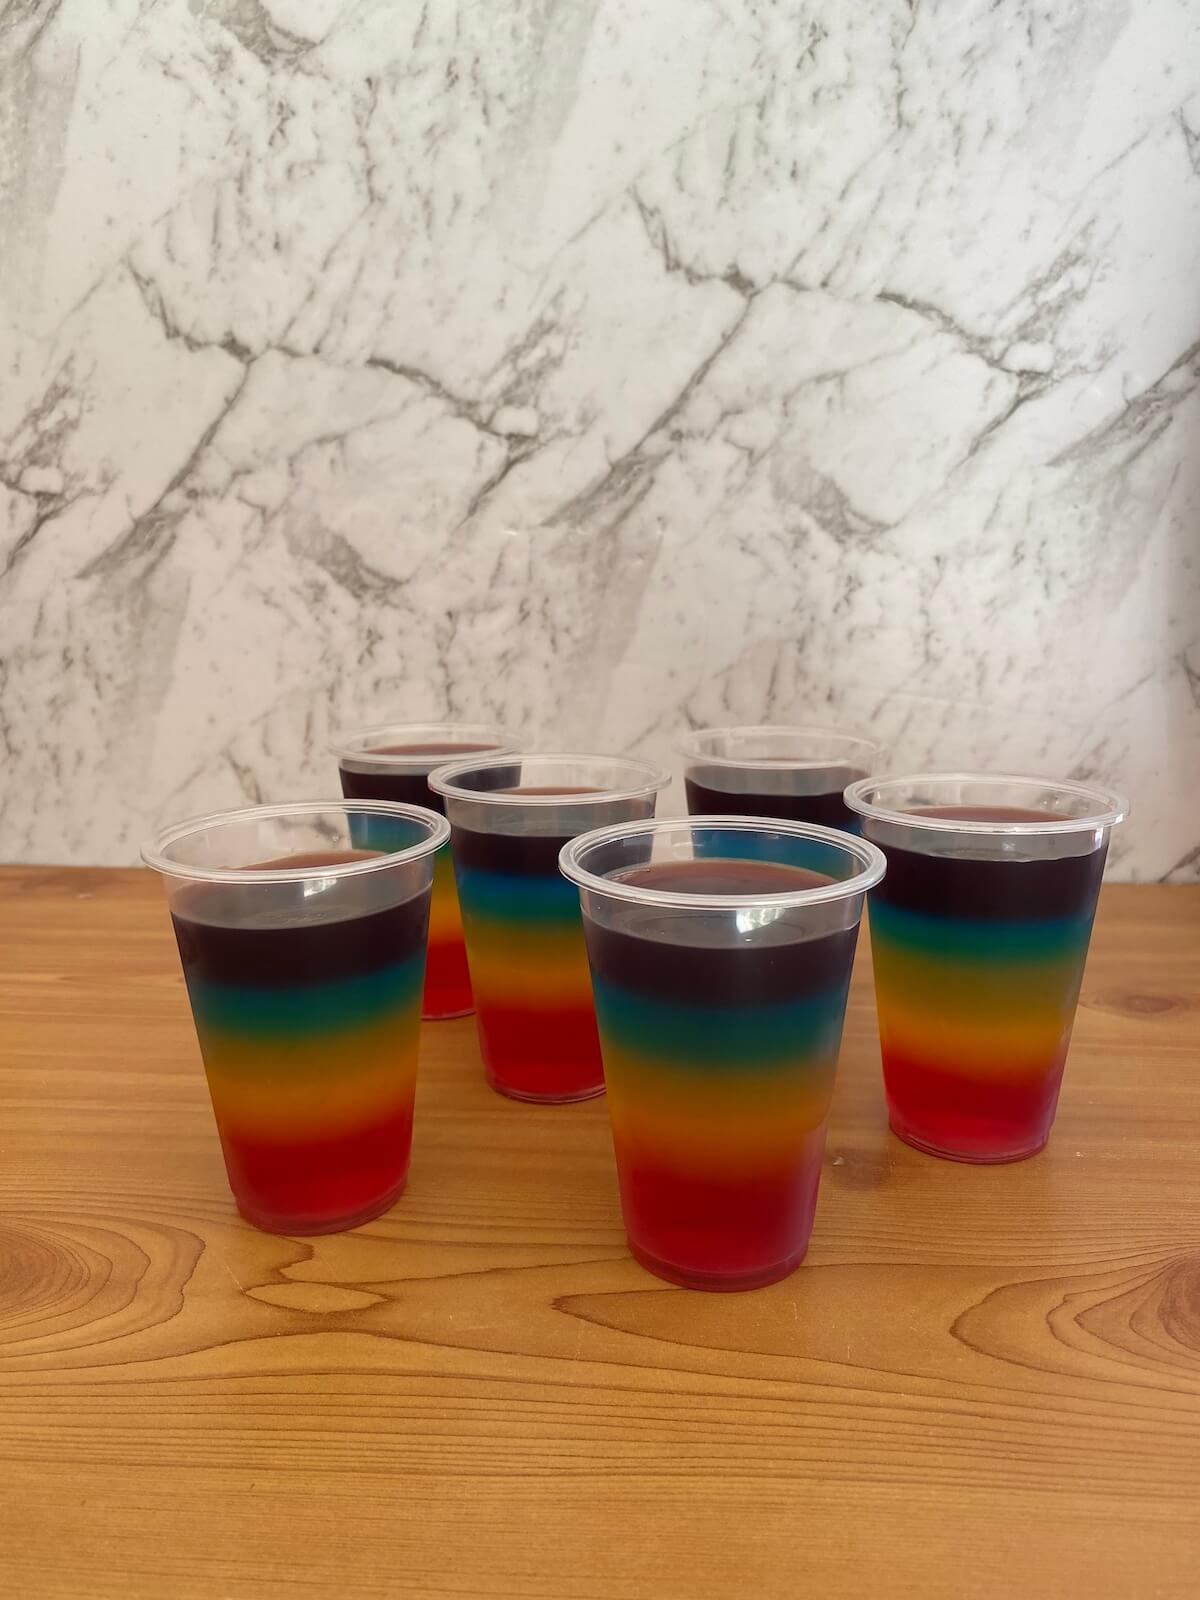 Cups of rainbow jelly on a table